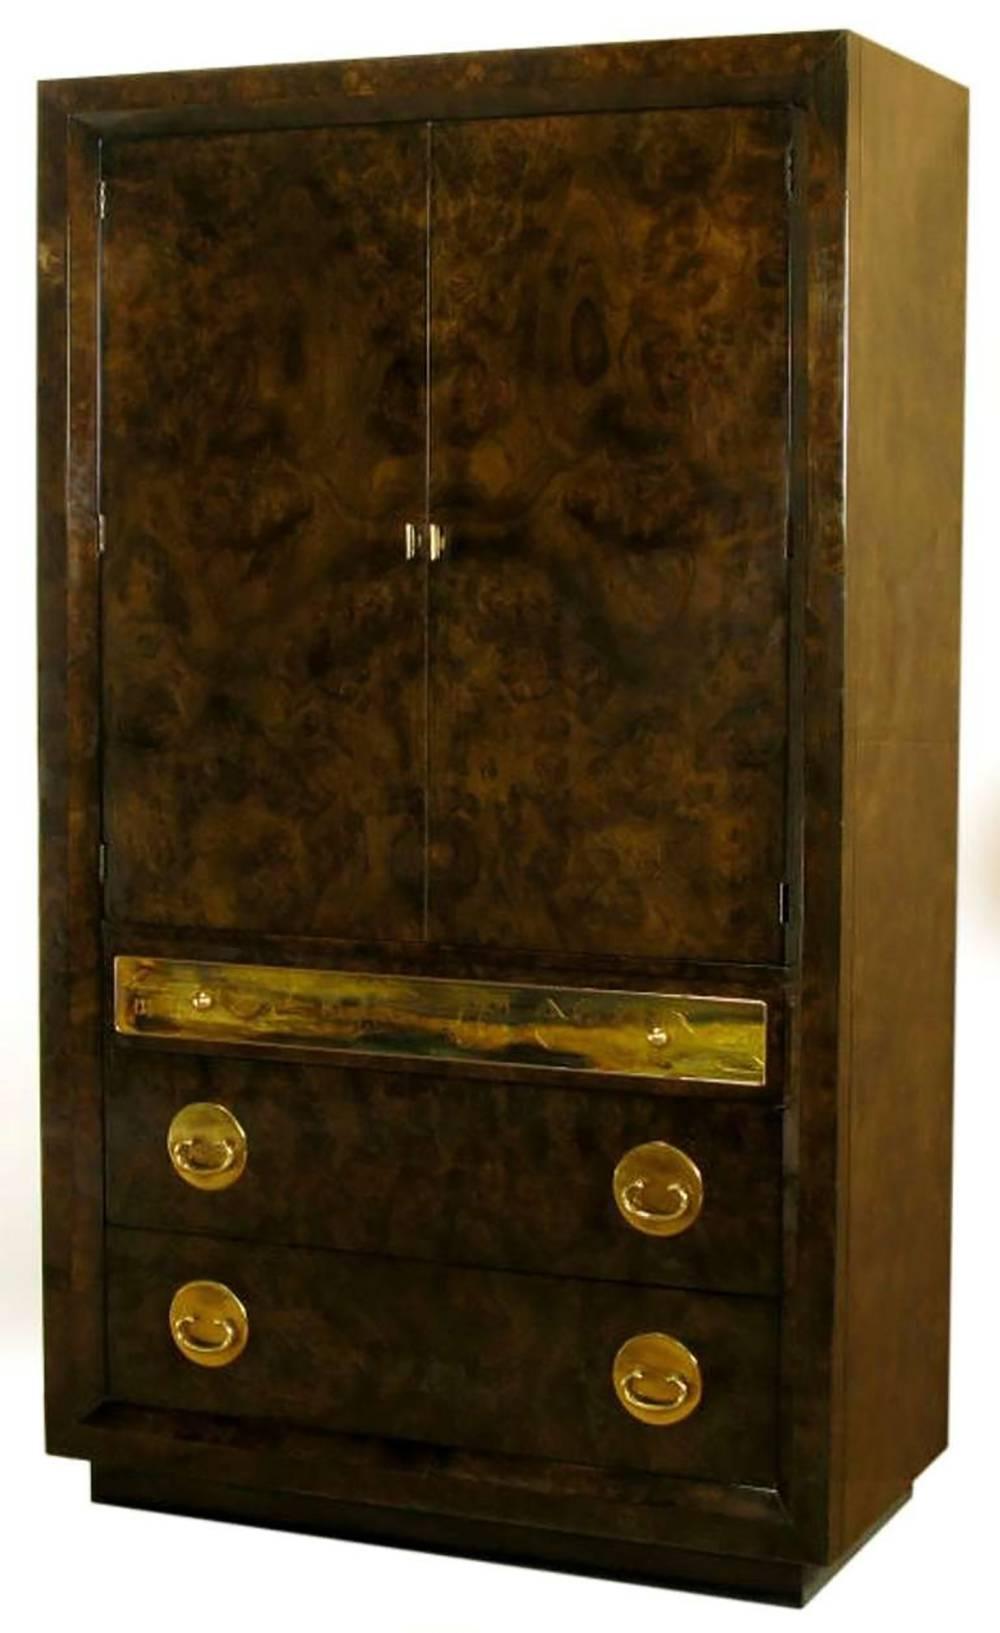 Mastercraft burl amboyna wood tall wardrobe cabinet. Three drawers in the base with top drawer faced with an acid etched panel by Bernhard Rohne. The upper compartment is fronted by two doors, and offers storage in three drawers with a shelf above.